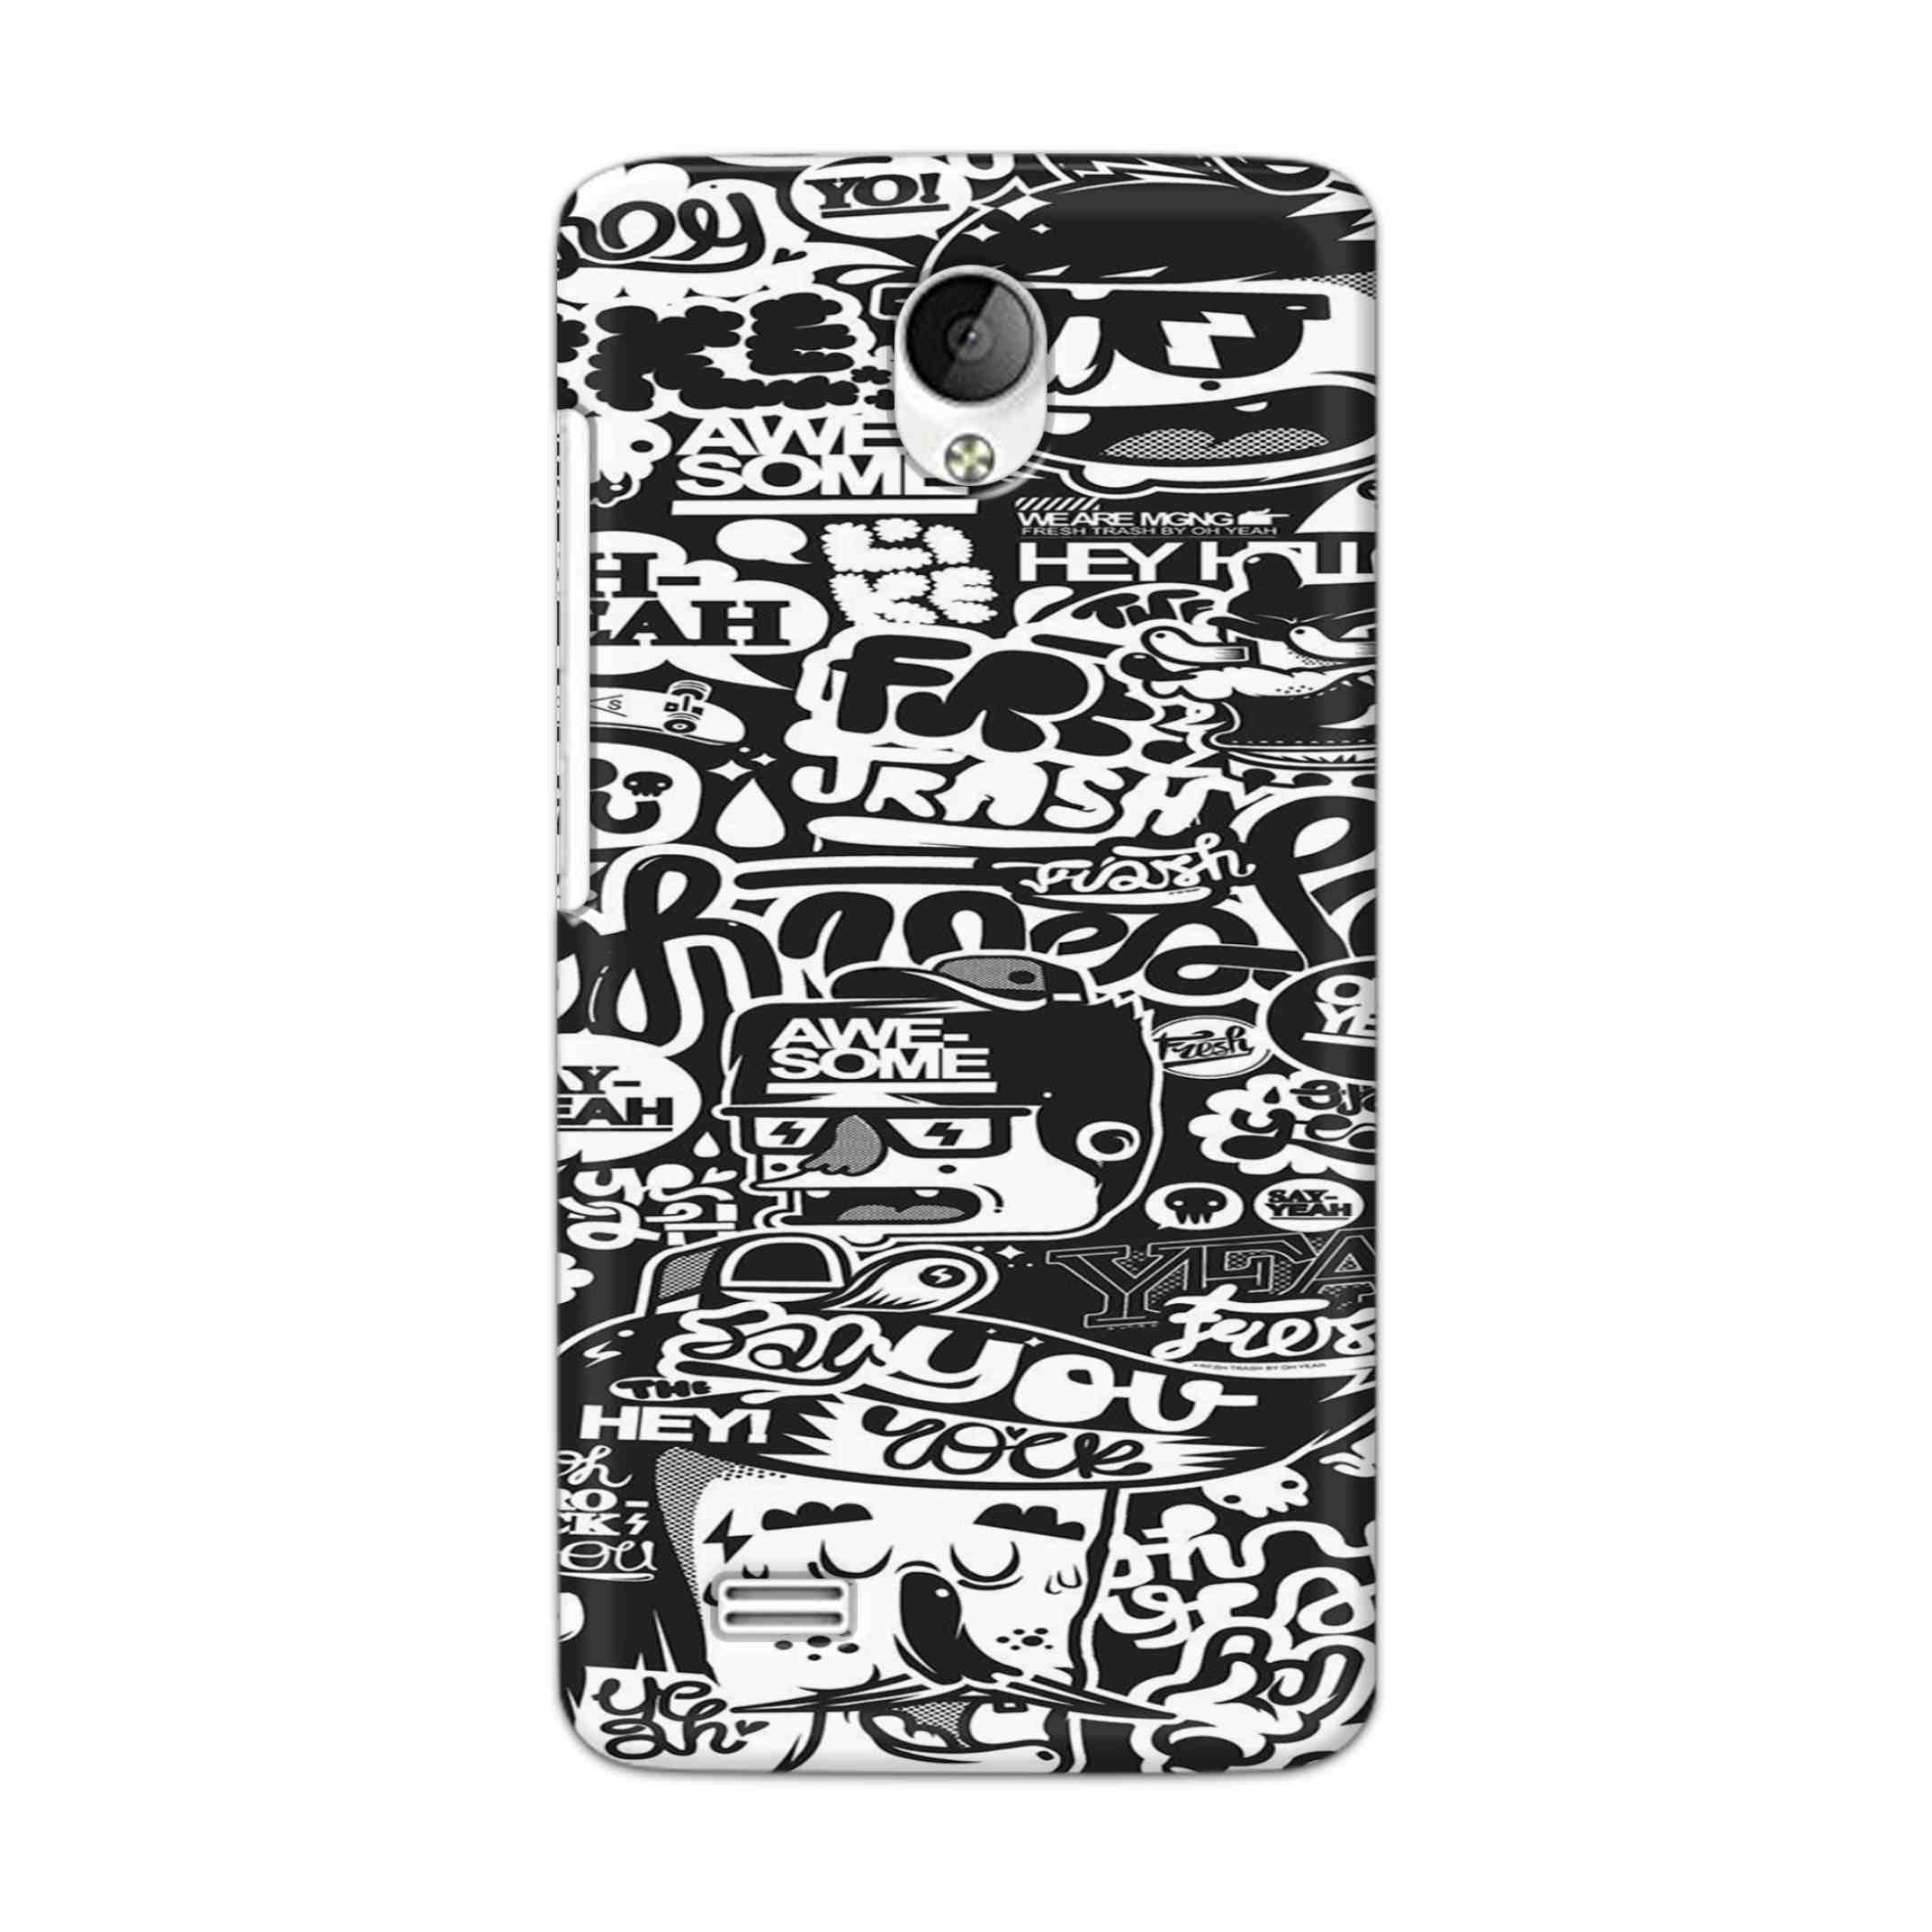 Buy Awesome Hard Back Mobile Phone Case Cover For Vivo Y21 / Vivo Y21L Online